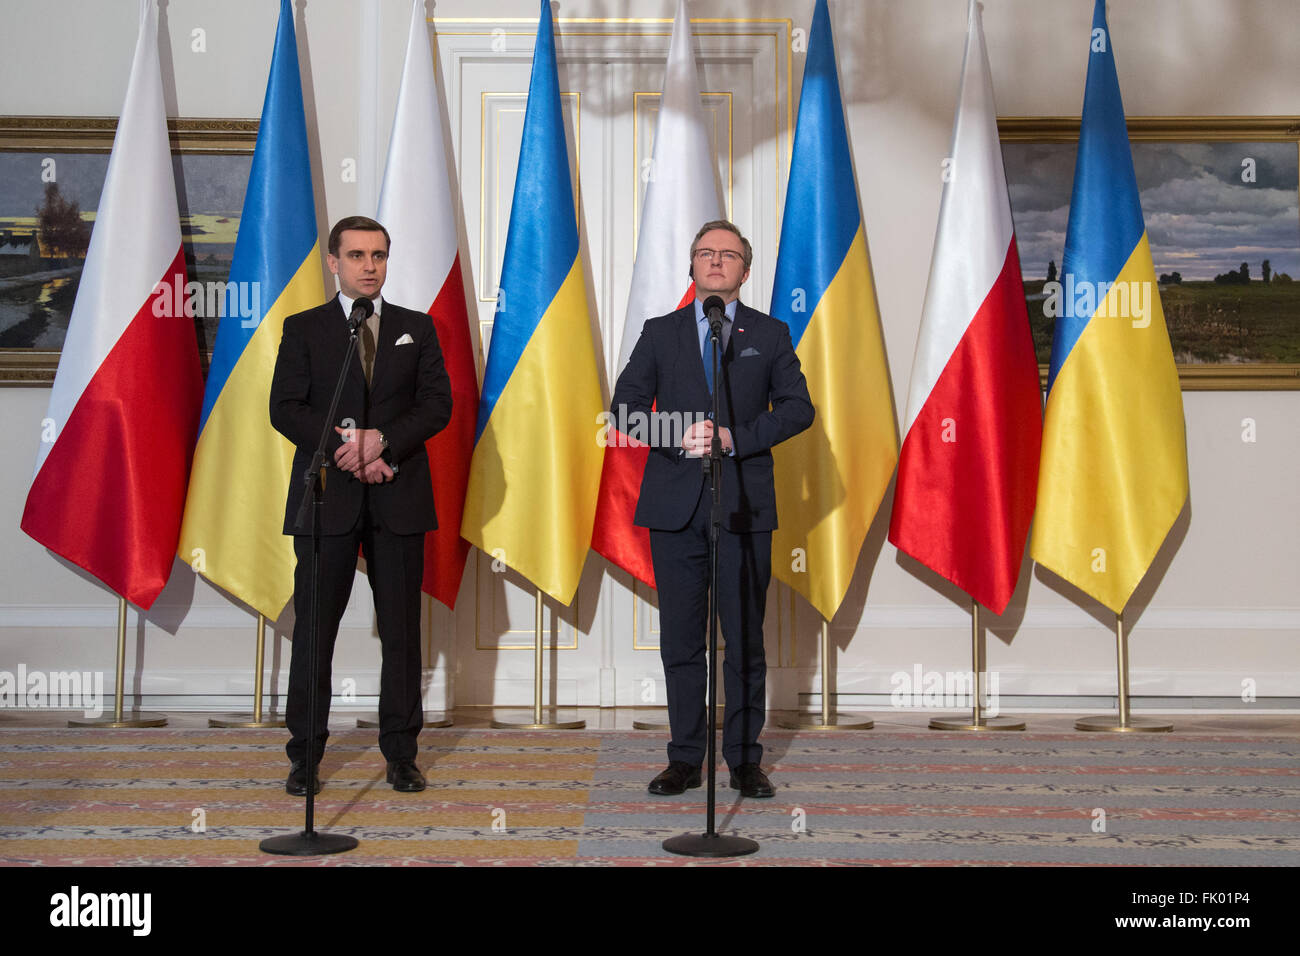 Deputy of Head of Presidential Administration of Ukraine, Kostiantyn Yelisieiev (left) and Secretary of State at the Chancellery of the President of Poland, Krzysztof Szczerski (right)  during a press conference after meeting of the Consultative Committee of Poland and Ukraine. (Photo by Mateusz Wlodarczyk / Pacific Press) Stock Photo